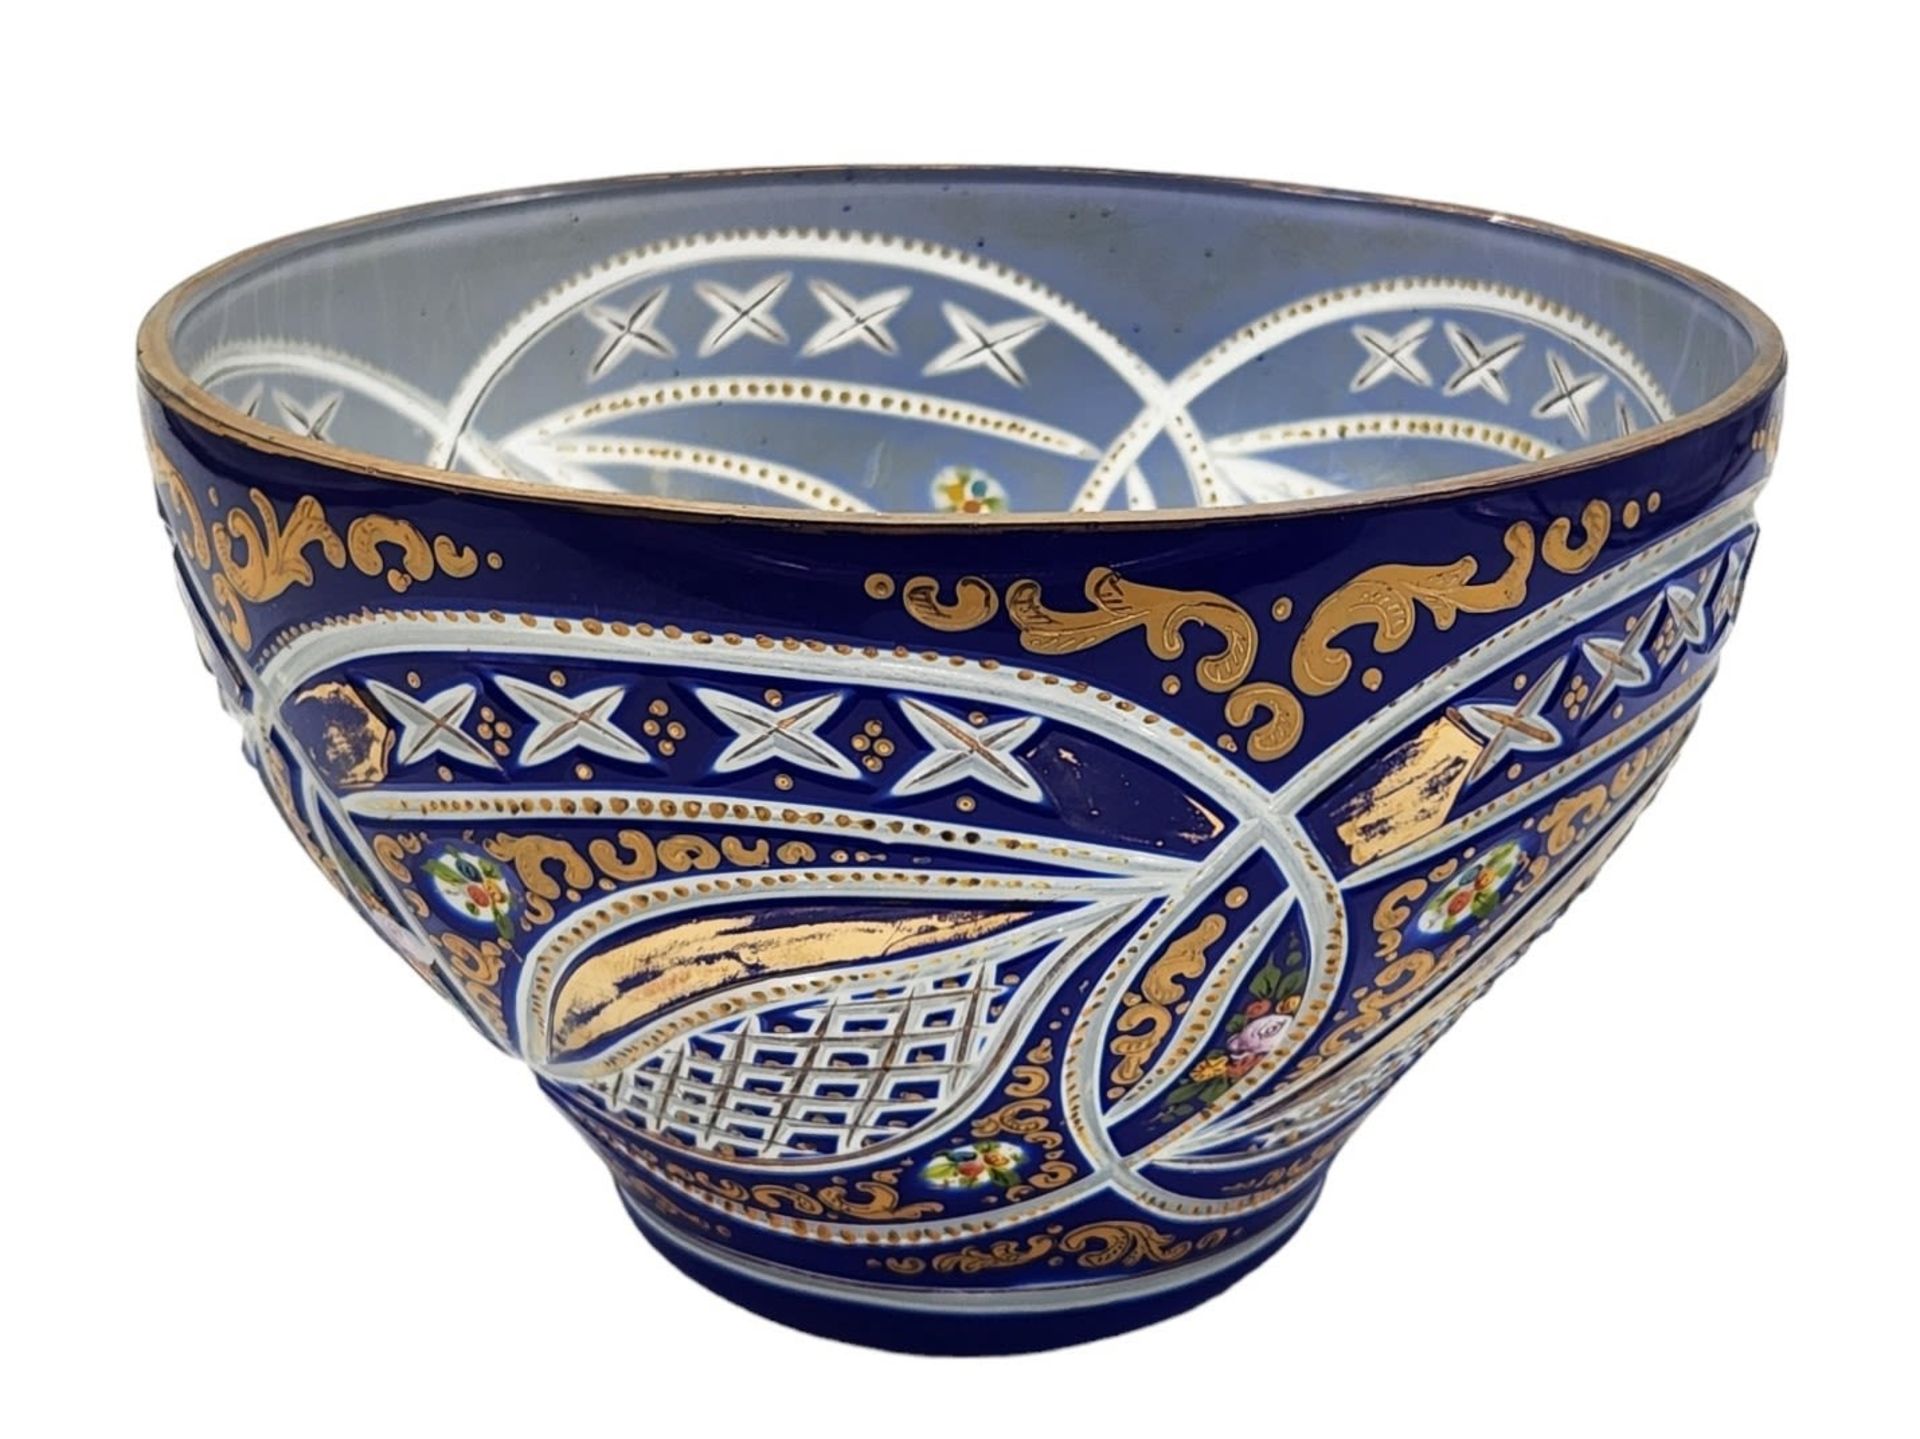 Ancient Bohemian vessel, a very high quality 19th century vessel created for the Ottoman market in - Image 8 of 14